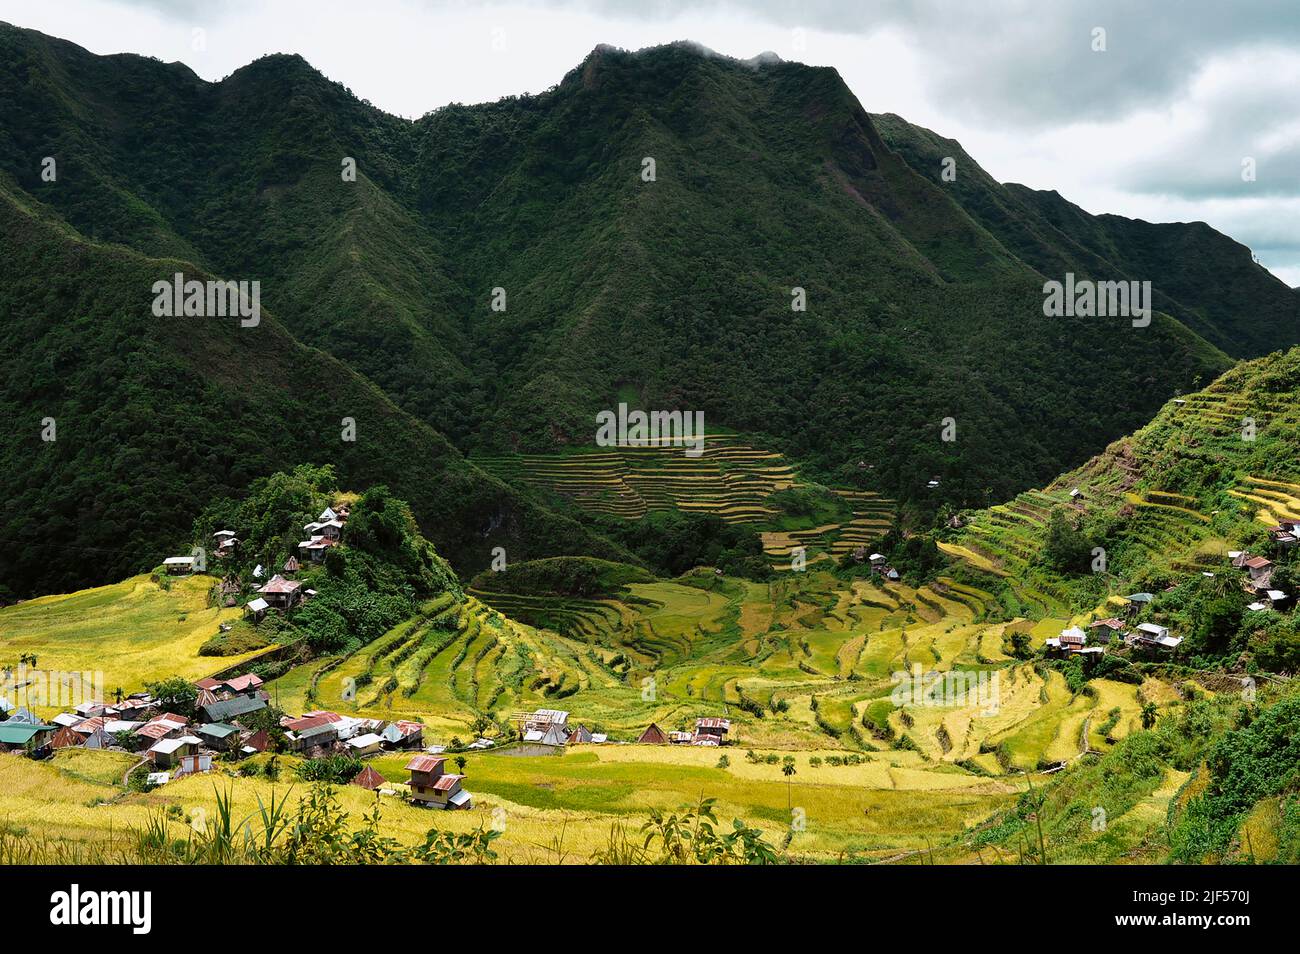 Mountain Province, Philippines: majestic agricultural landscape of the ancient amphitheater Banaue Rice Terraces. Dubbed Eighth Wonder of the World. Stock Photo